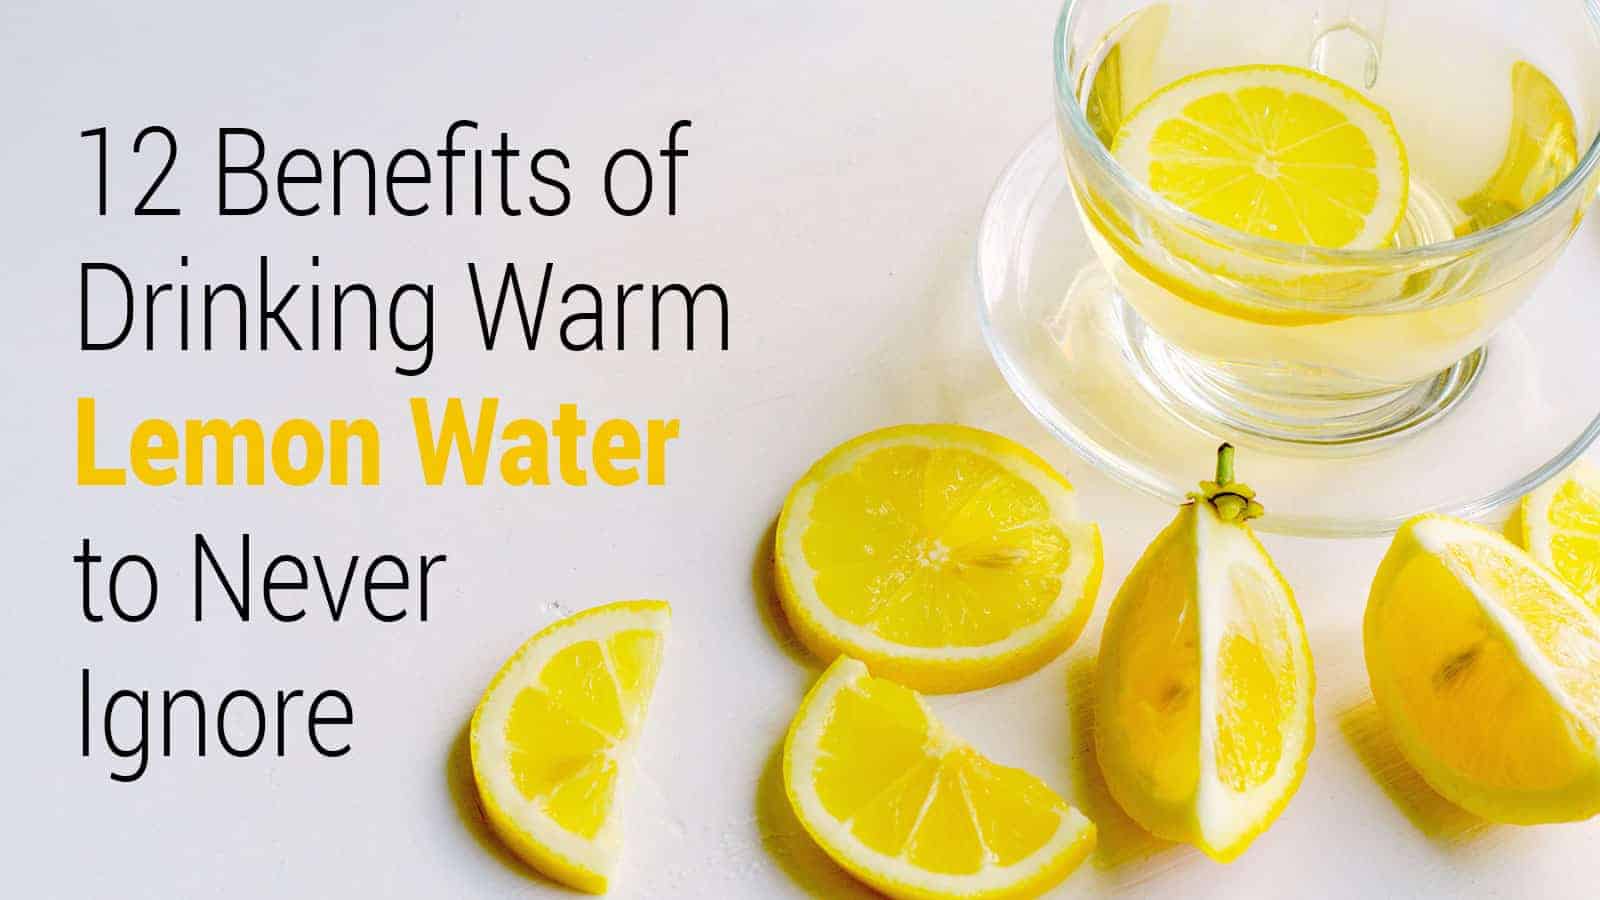 12 Benefits of Drinking Warm Lemon Water to Never Ignore